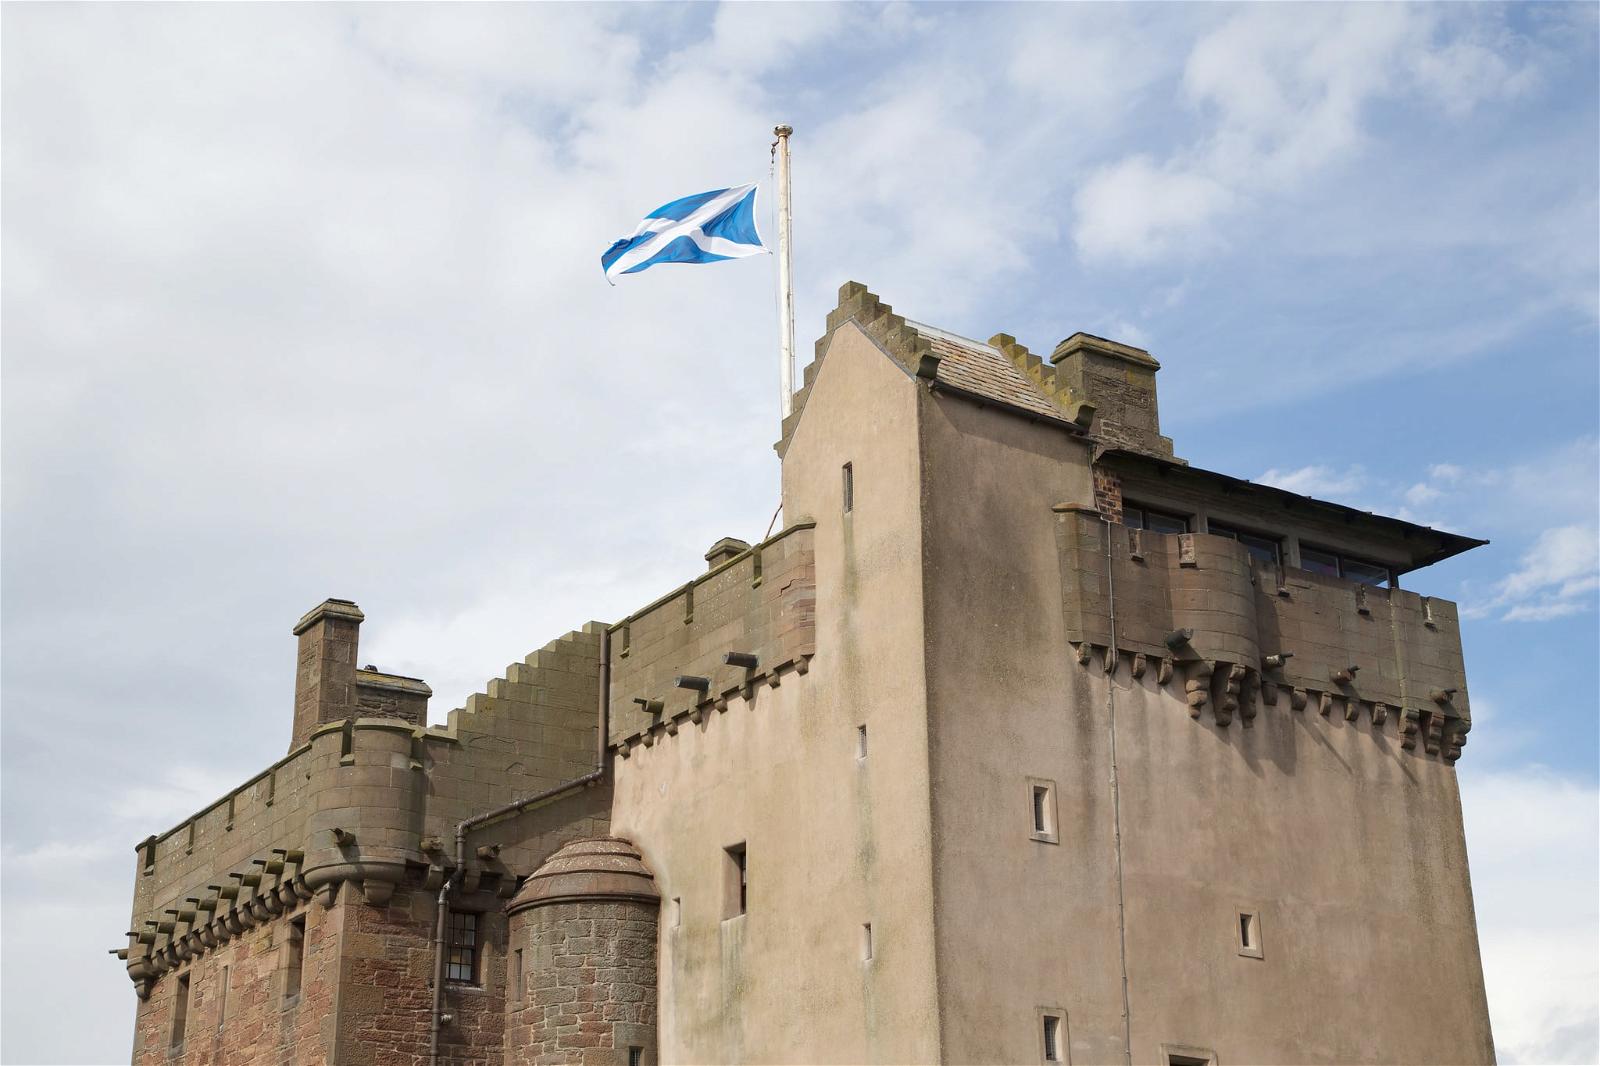 Hình ảnh của Broughty Castle. castle museum broughtyferry dundee angus 17thcentury victorian nophotoshop 1860s stronghold saltire 16thcentury unedited rebuilt 15thcentury scheduled straightfromthecamera 1490s broughtycastle dundeecitycouncil scheduledmonument sirrobertrowandanderson refortification 149096